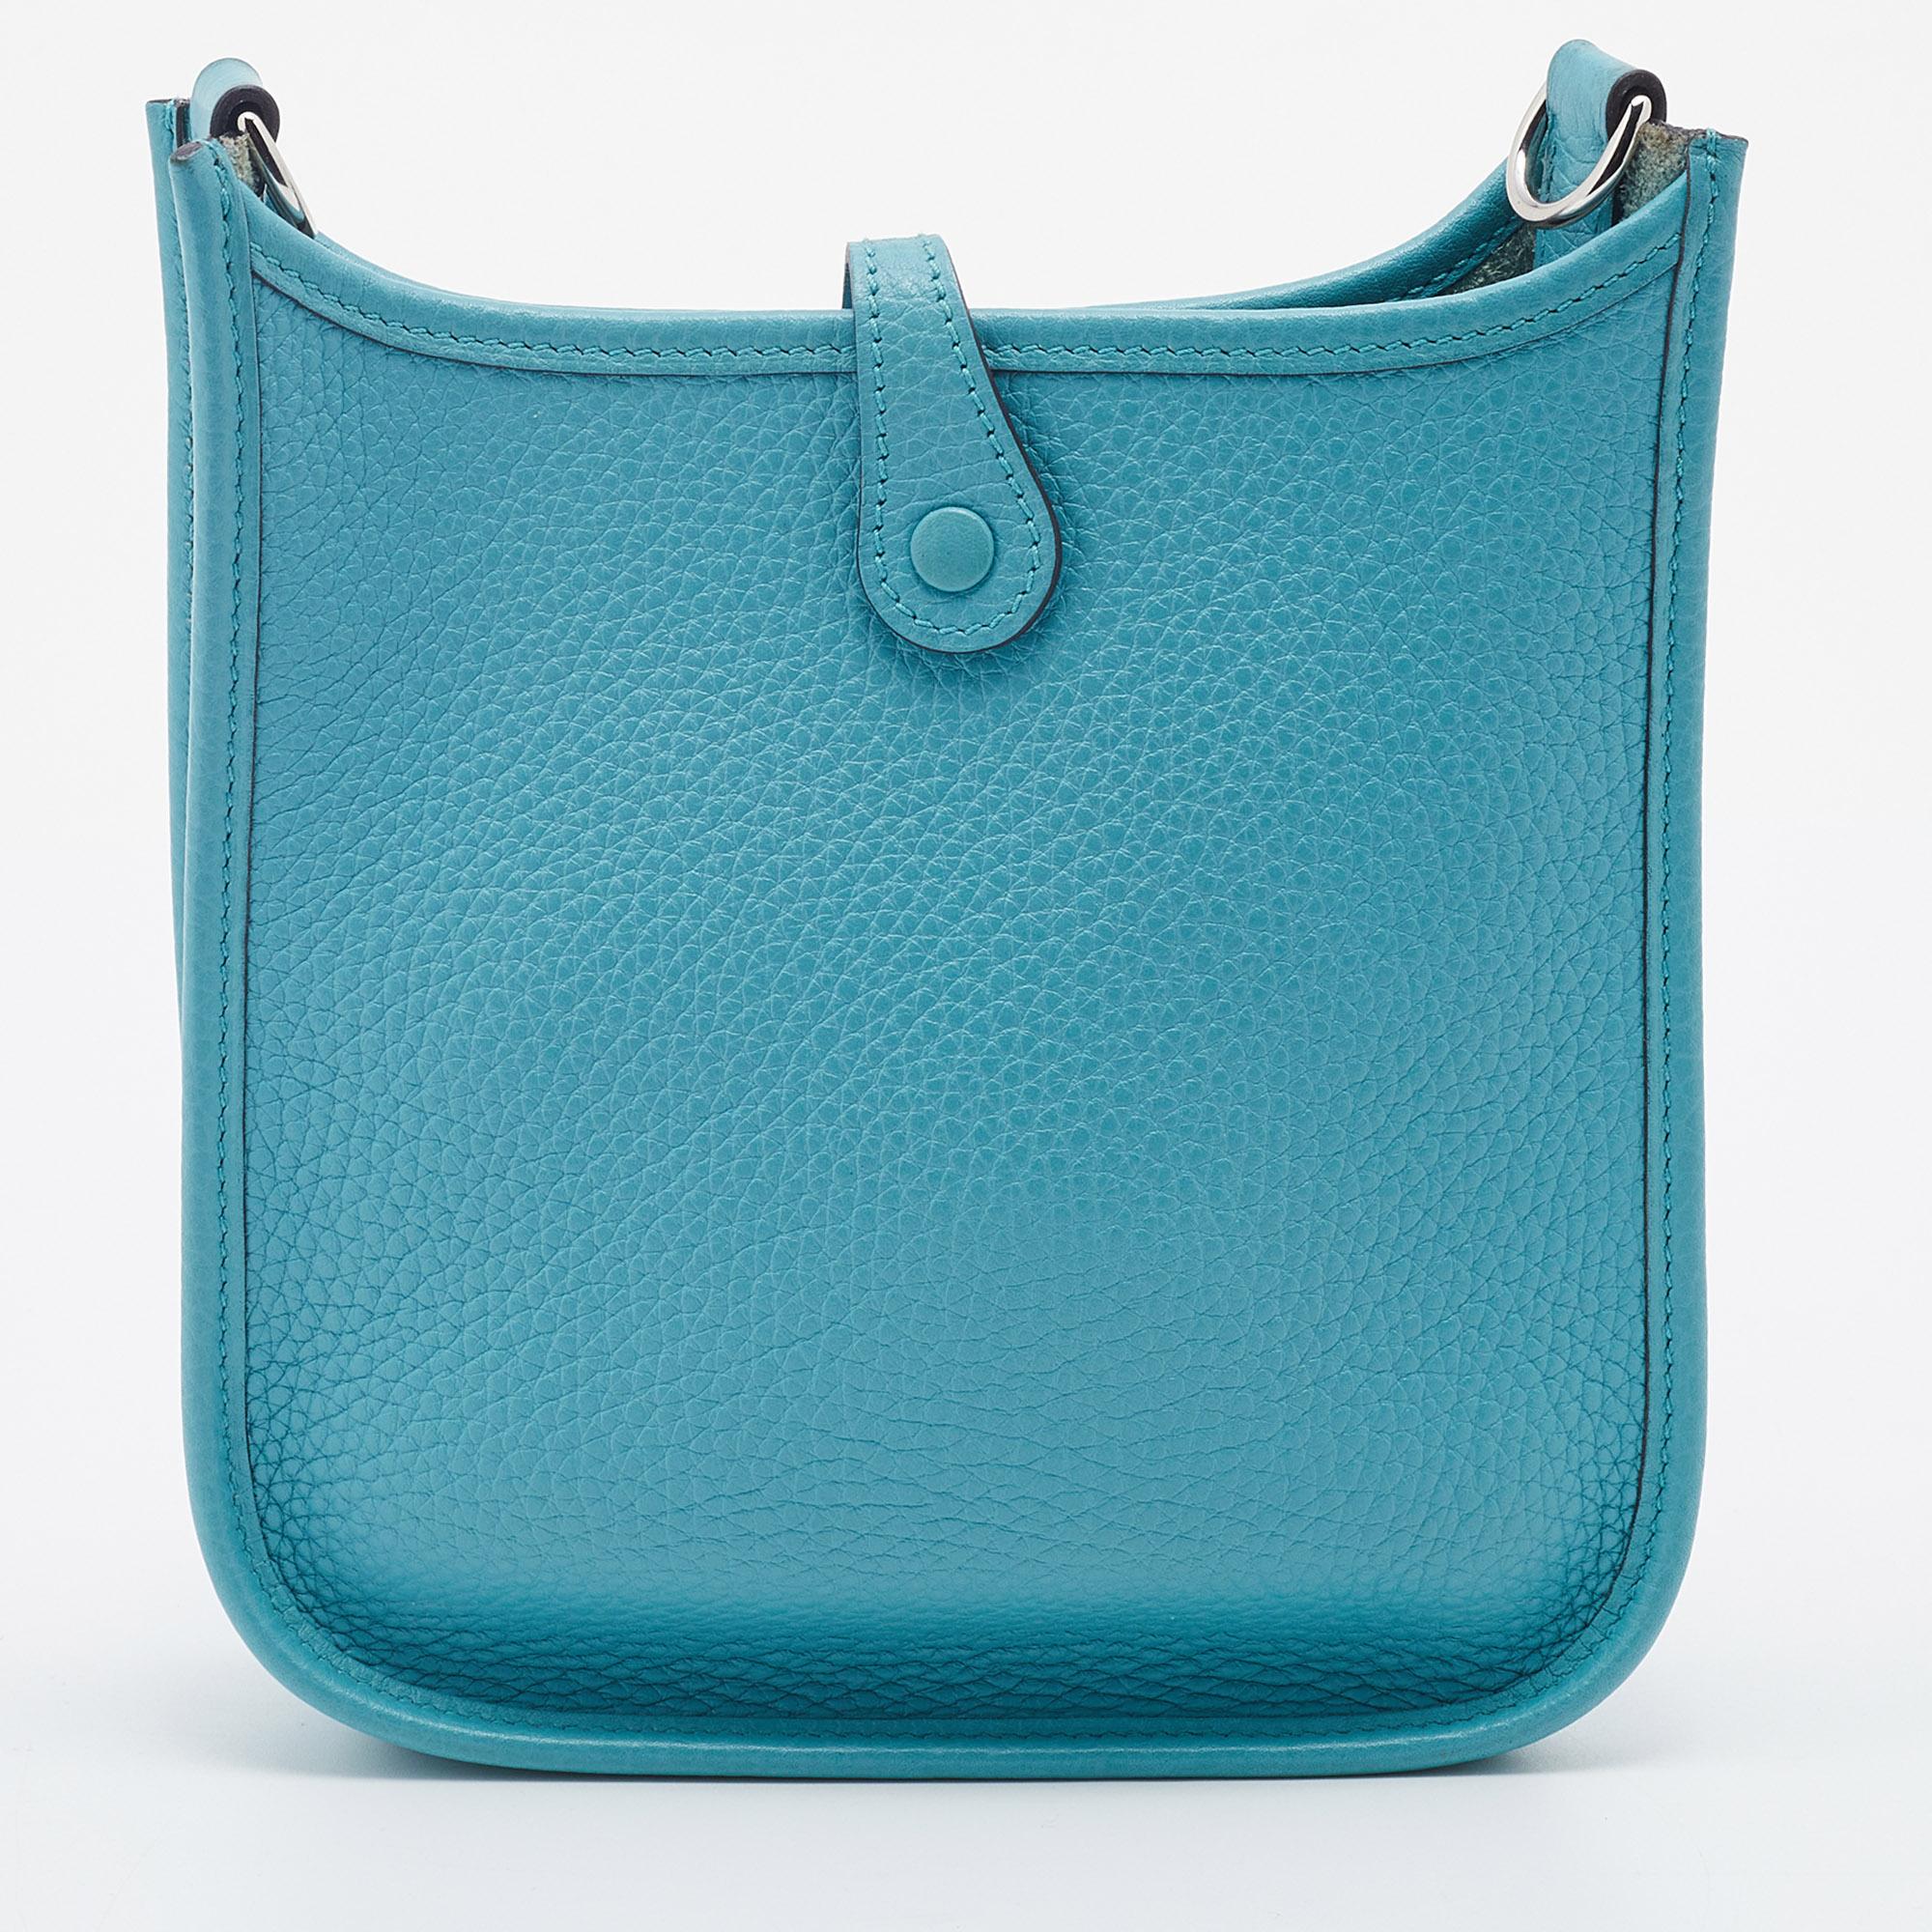 The Evelyne is another investment-worthy bag from Hermès. This one here is crafted from blue Saint Cyr Clemence leather and detailed with the signature elements of the leather tab closure, the saddle-like shape, and the perforated H on the front.